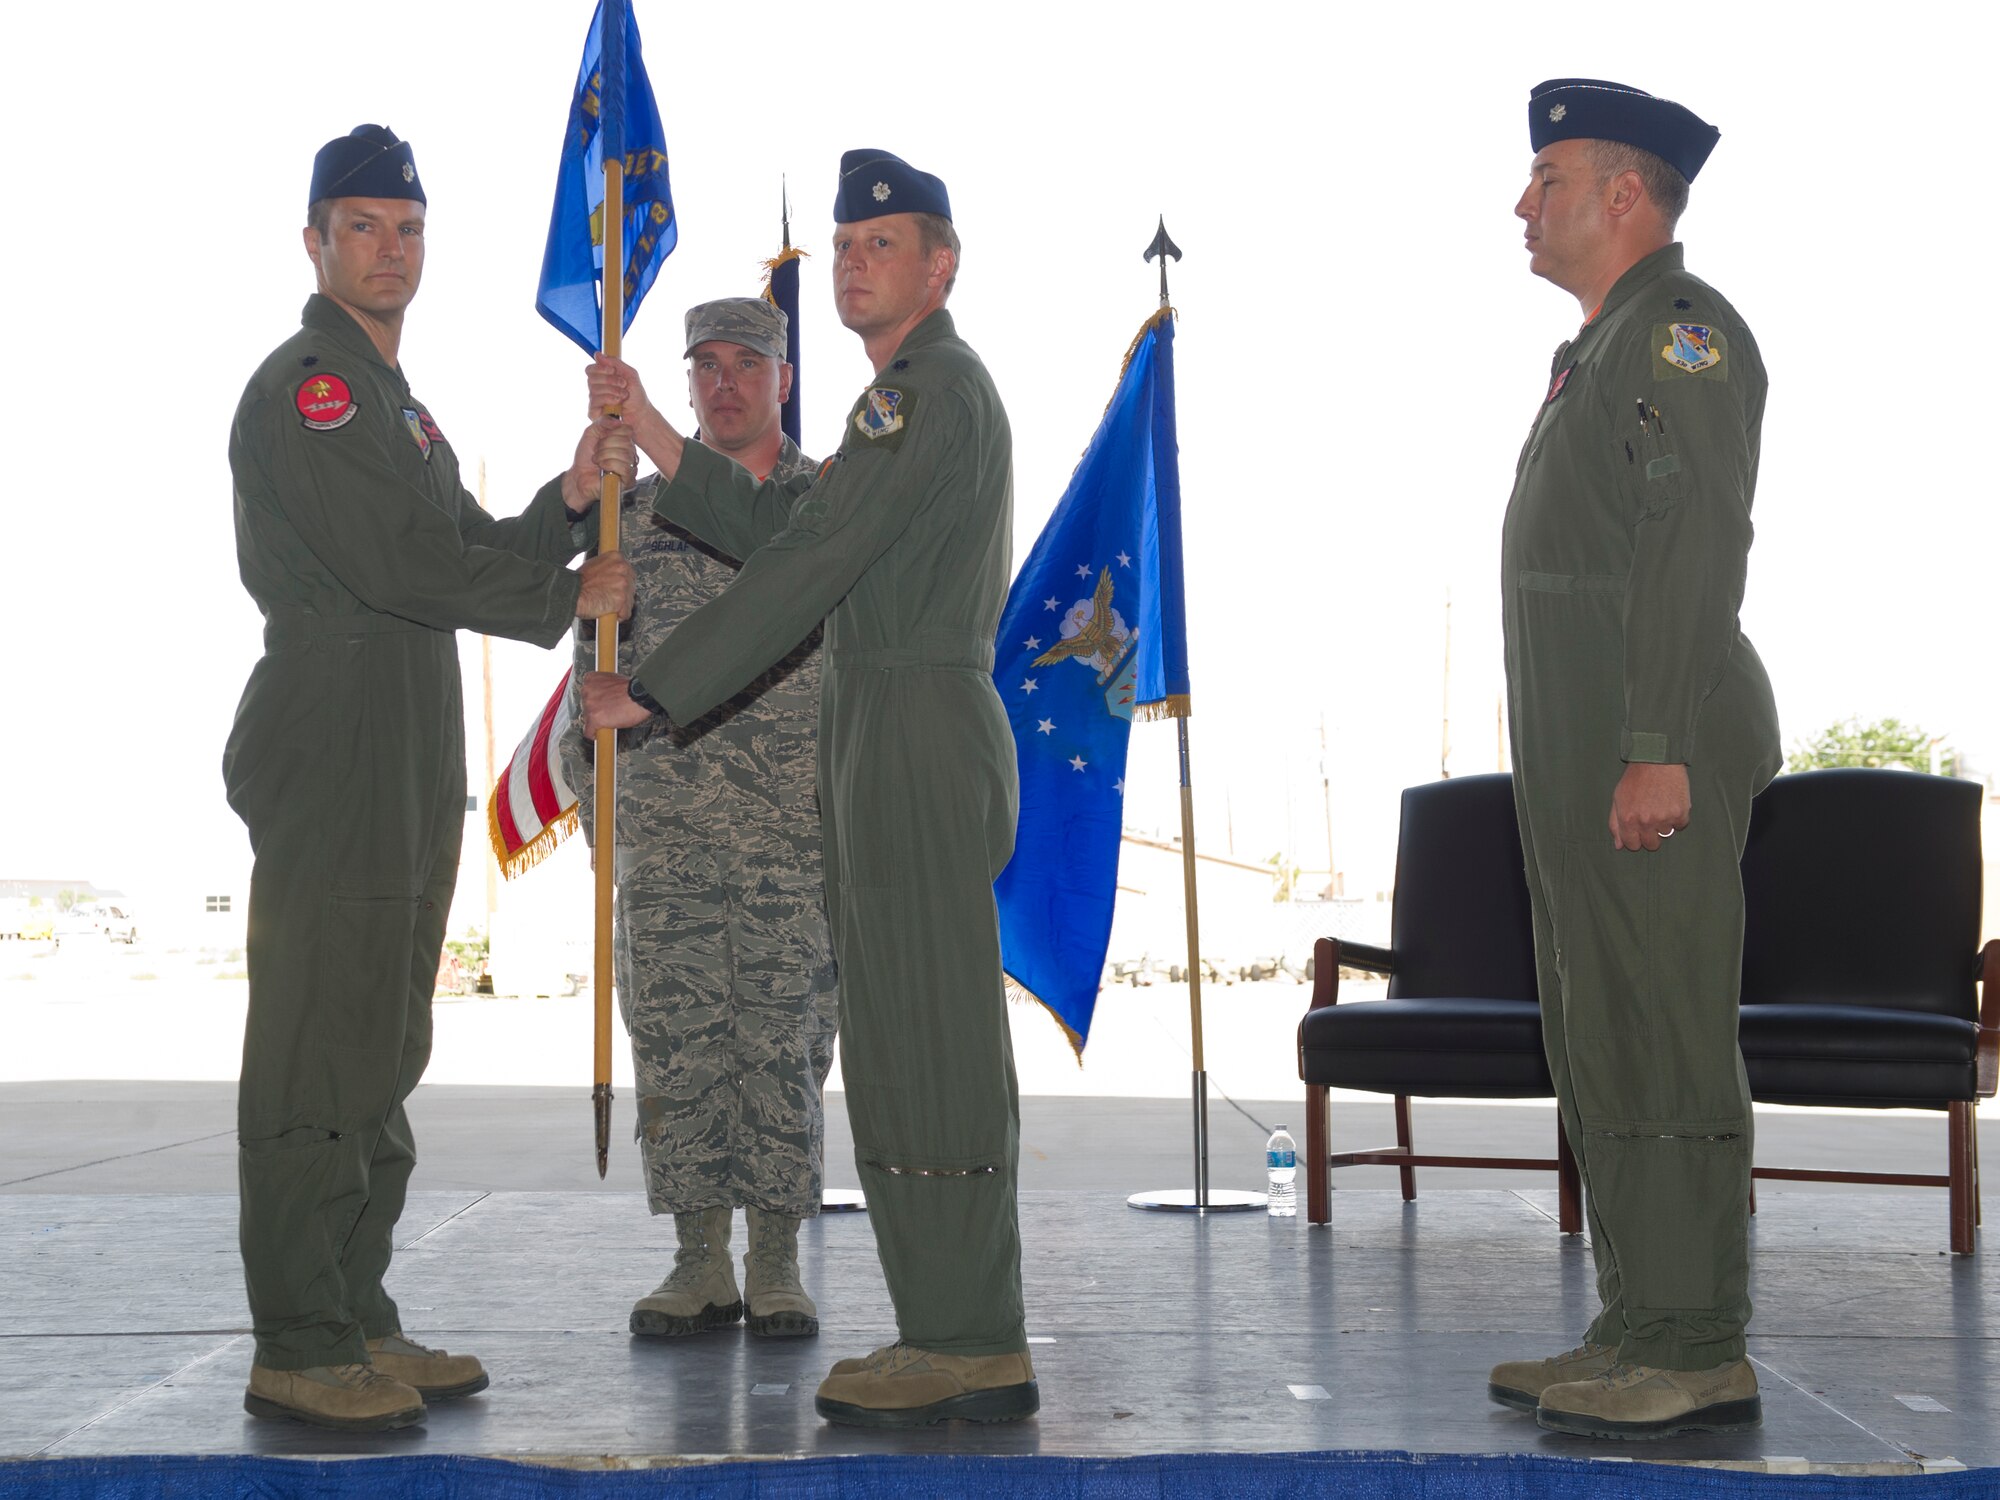 Lt. Col. Brian M. Swyt, the outgoing commander of Holloman’s Detachment 1, 82d Aerial Targets Squadron, passes the unit guidon to their parent unit commander, Lt. Col. Matthew Garrison, 82d ATRS commander from Tydell Air Force Base, Fl., symbolizing the seamless change of command at Holloman Air Force Base, N.M., June 5. In the ceremony Lt. Col. Ronald King assumed command of Det 1, 82d ATRS from Swyt. Det 1, 82nd Aerial Targets Squadron operates QF-4 and QF-16 full-scale aerial targets for use at the White Sands Missile Range.  (U.S. Air Force photo by Staff Sgt. Stacy Moless/Released)